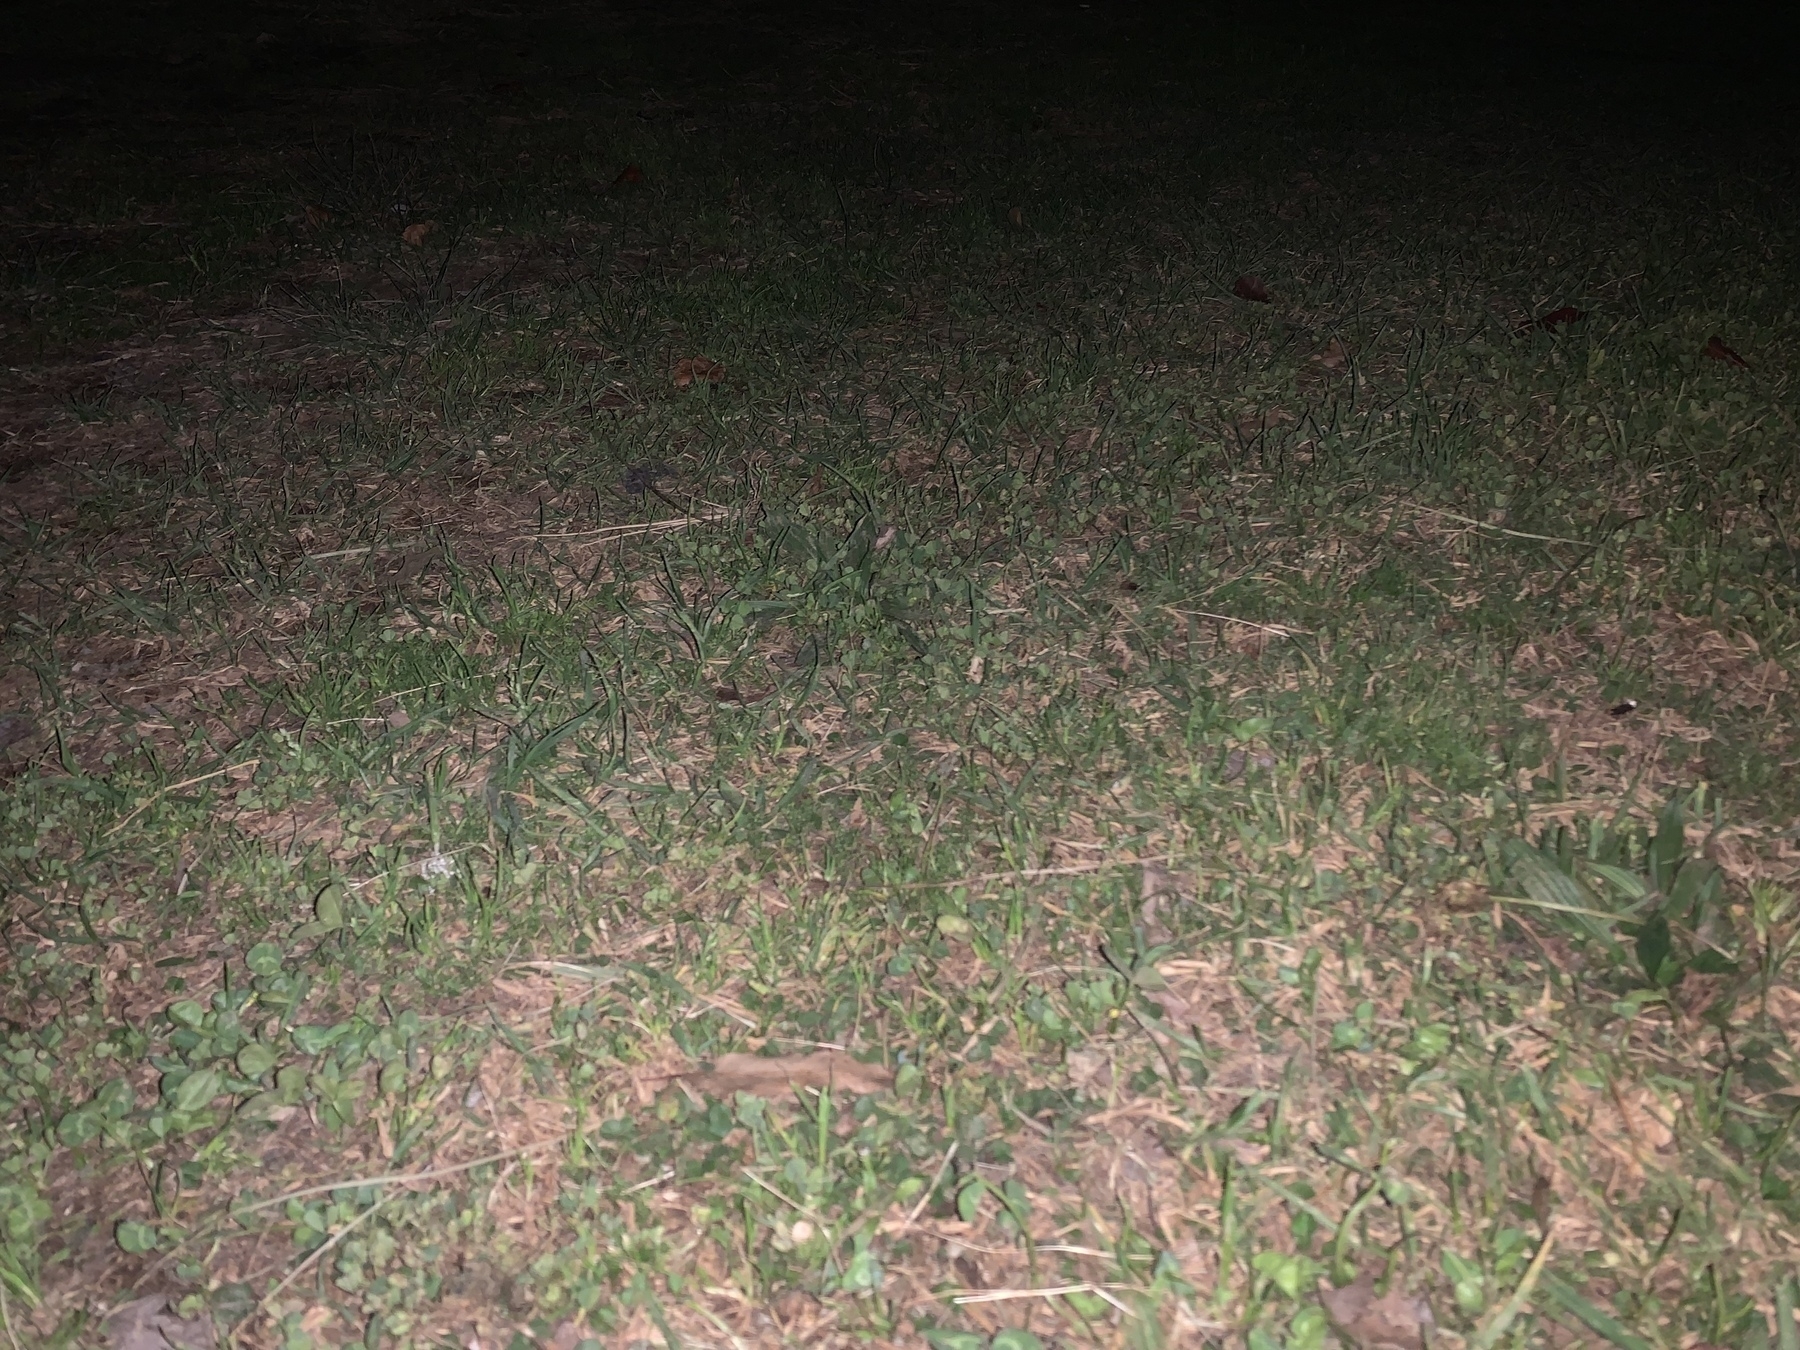 Patchy area of grass at night, fading into darkness in the background